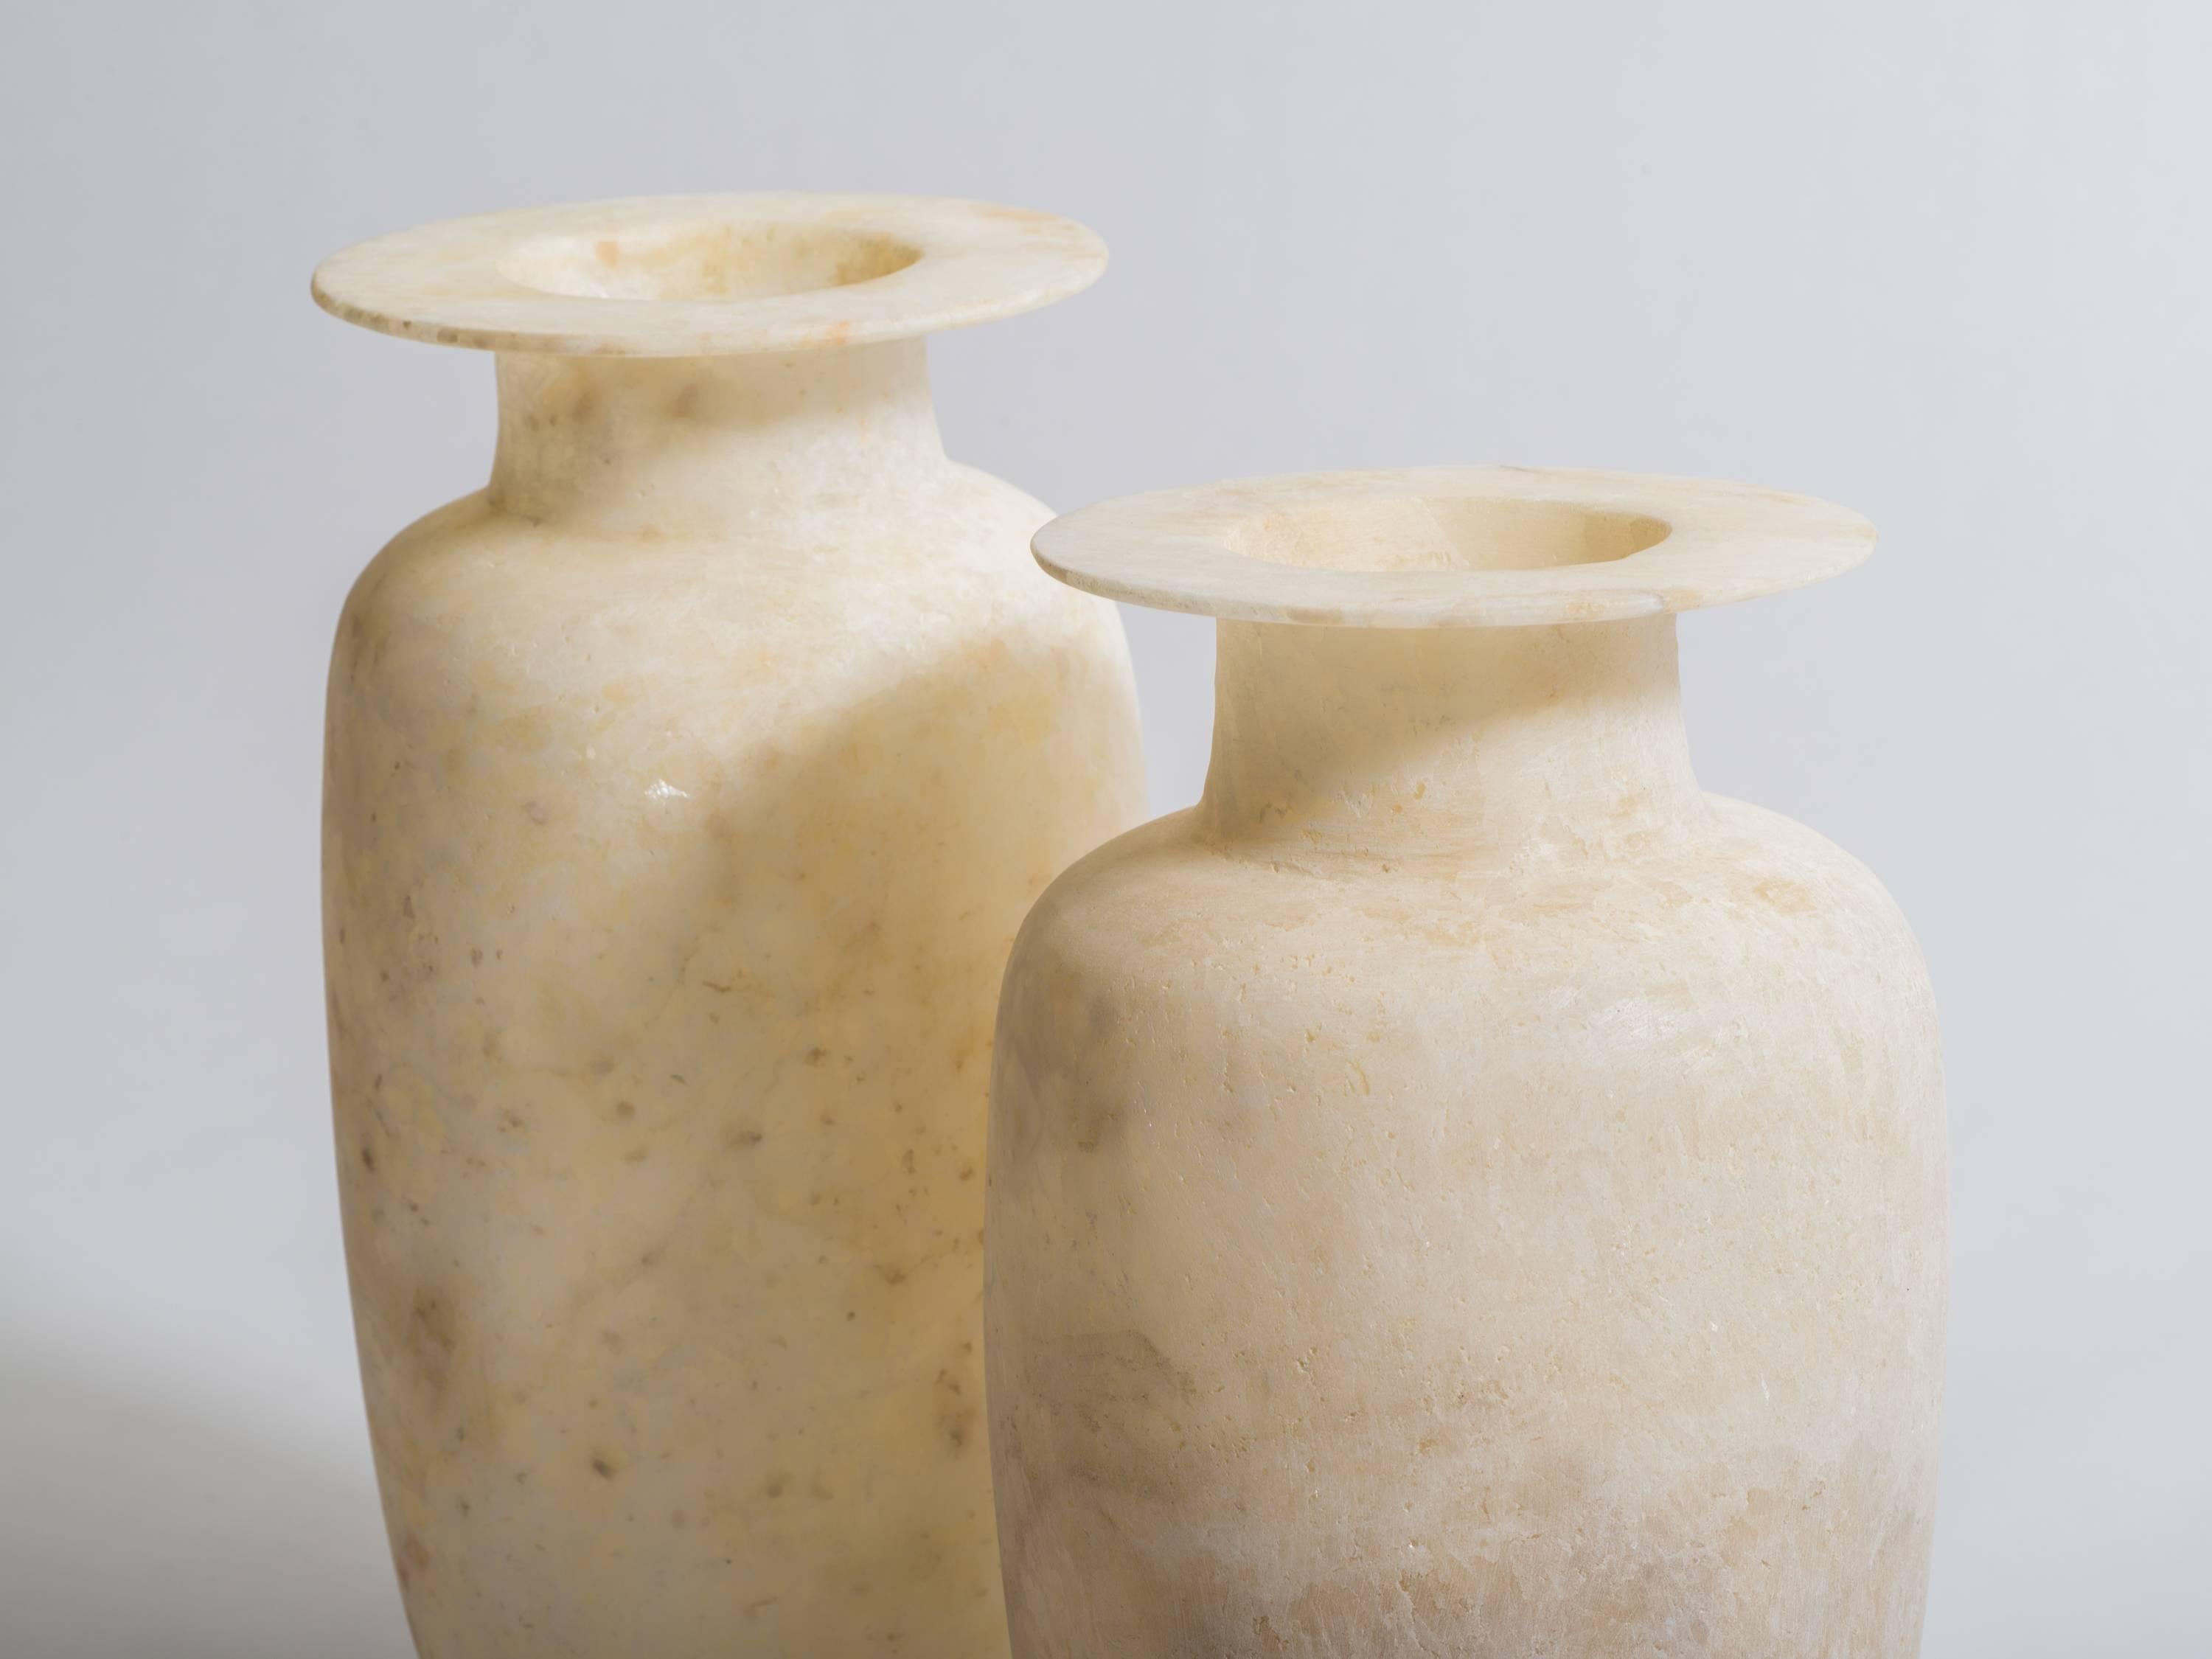 Tall Egyptian alabaster ovoid urn vase with wide rimmed top. 
Exquisitely hand-carved, the natural gypsum alabaster is milky white with natural veining. 
Vase on right side of photo available.
 Measures 15.75 inches height x 9 inches diameter.